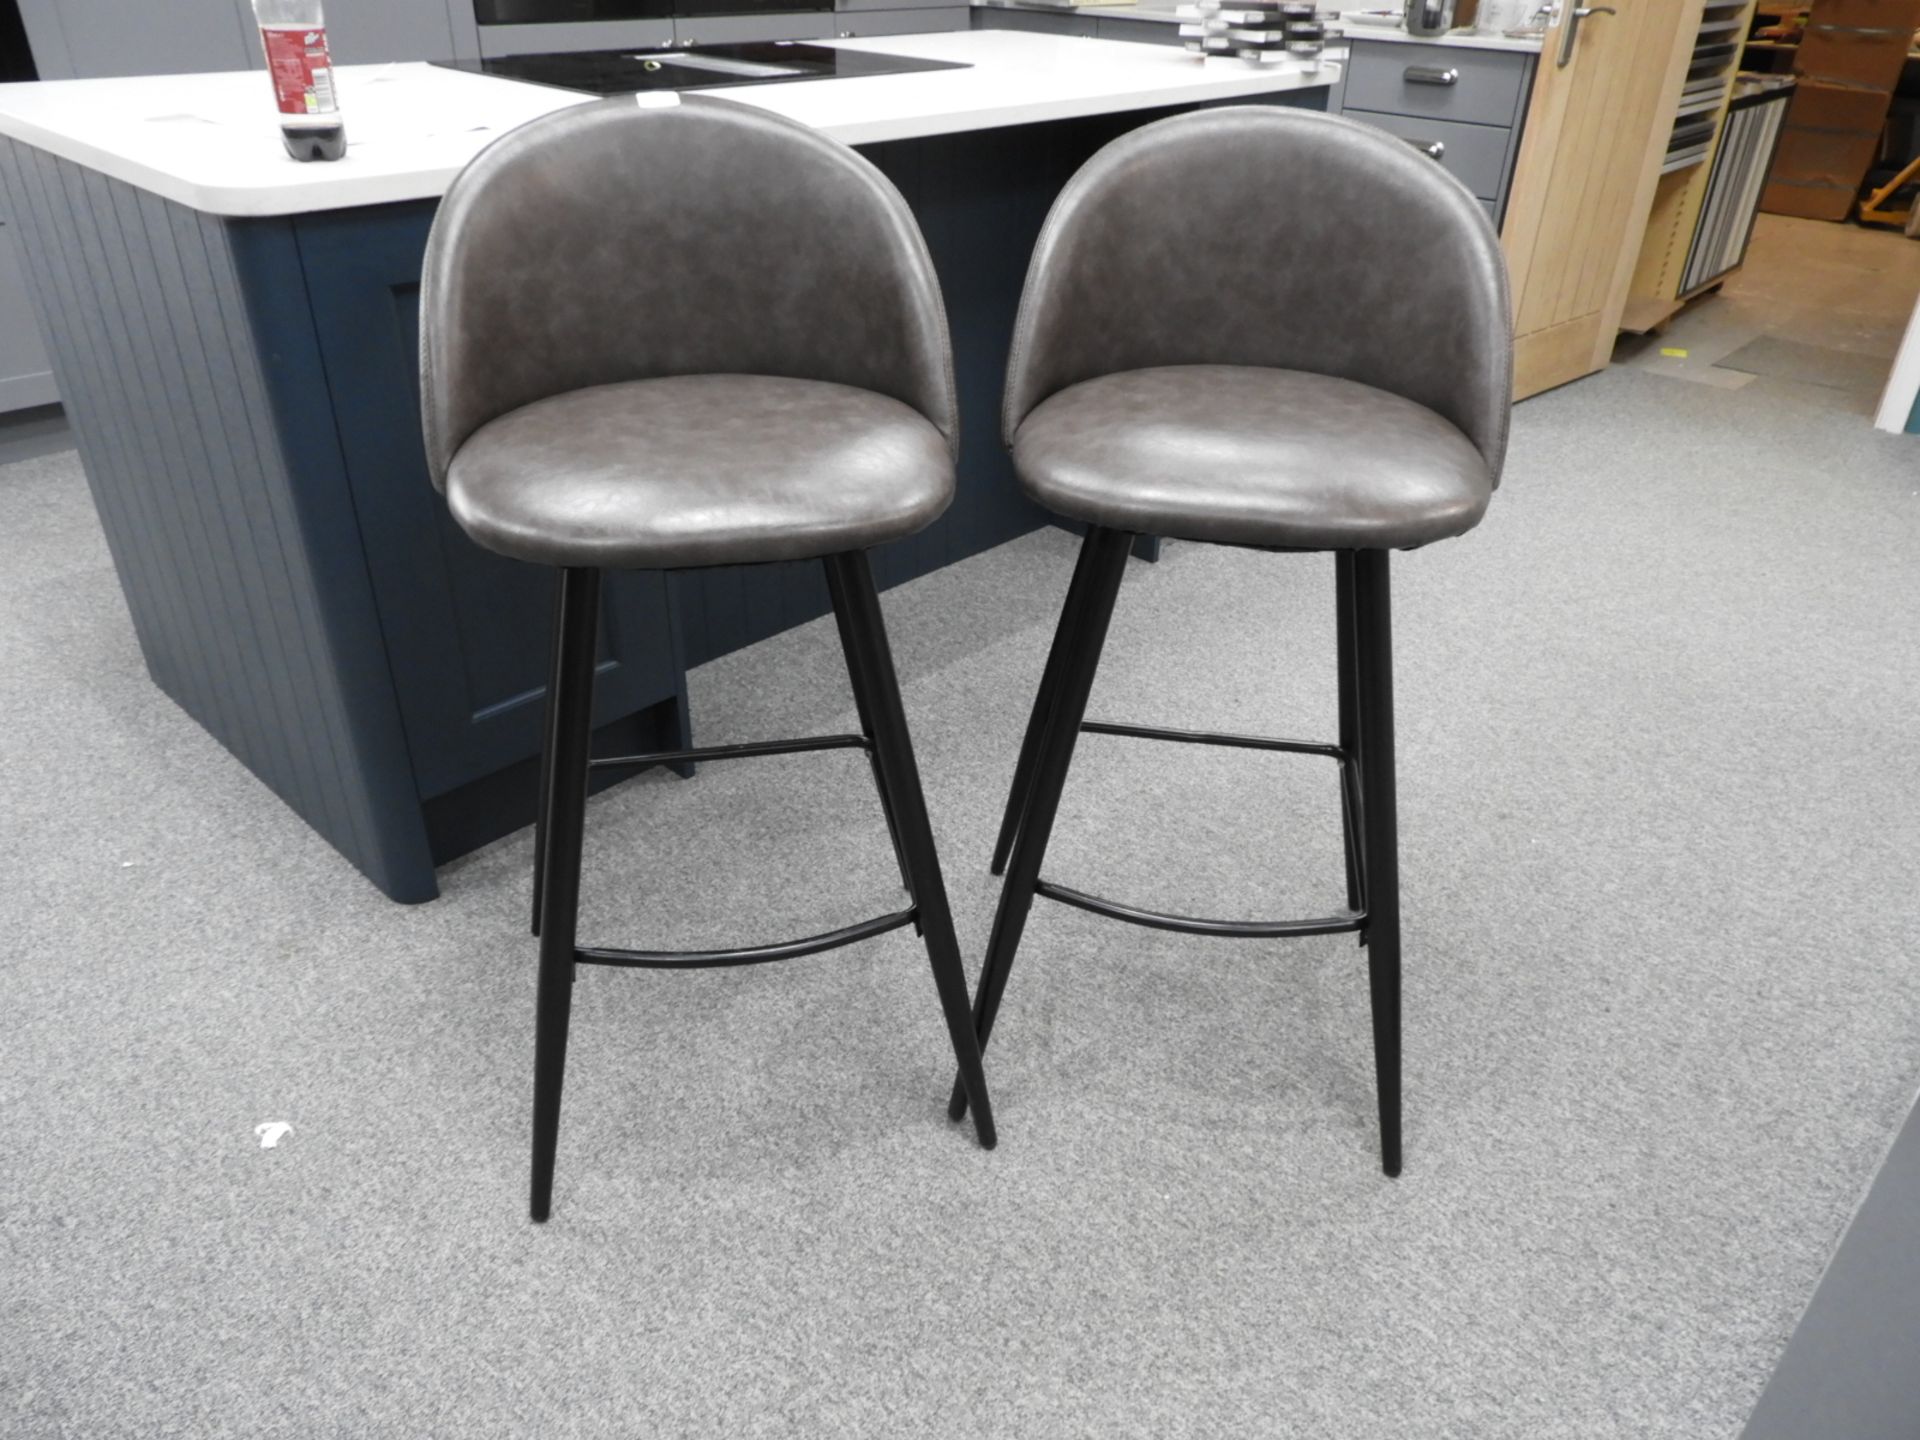 *Pair of Faux Leather Highseat Barstools